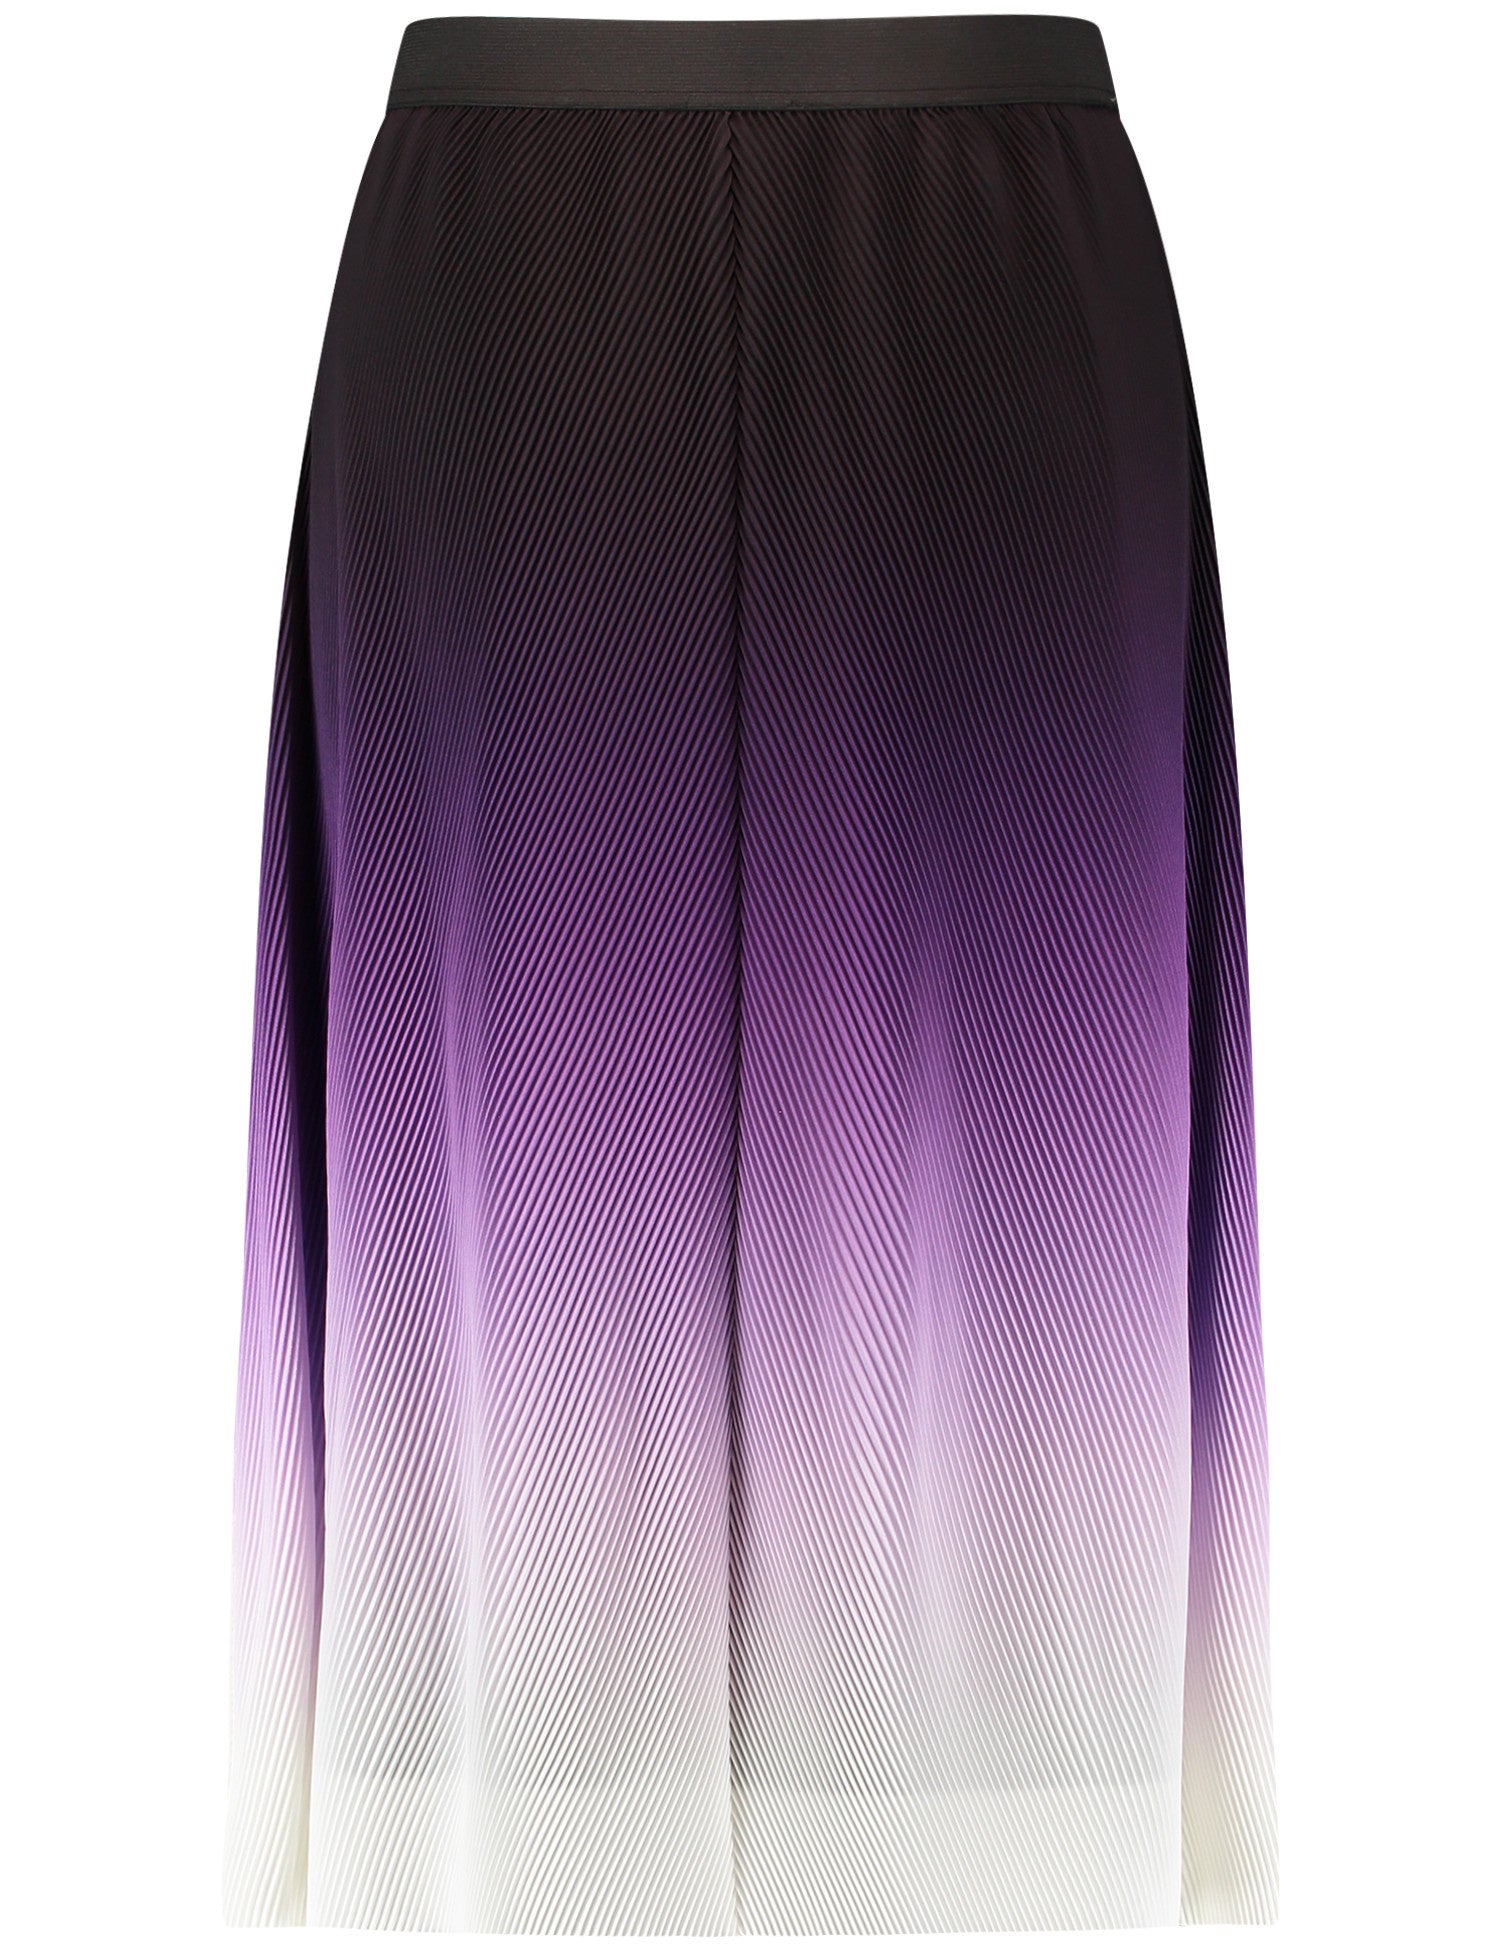 Pleated Skirt With Colour Gradiation And Elasticated Waistband_03